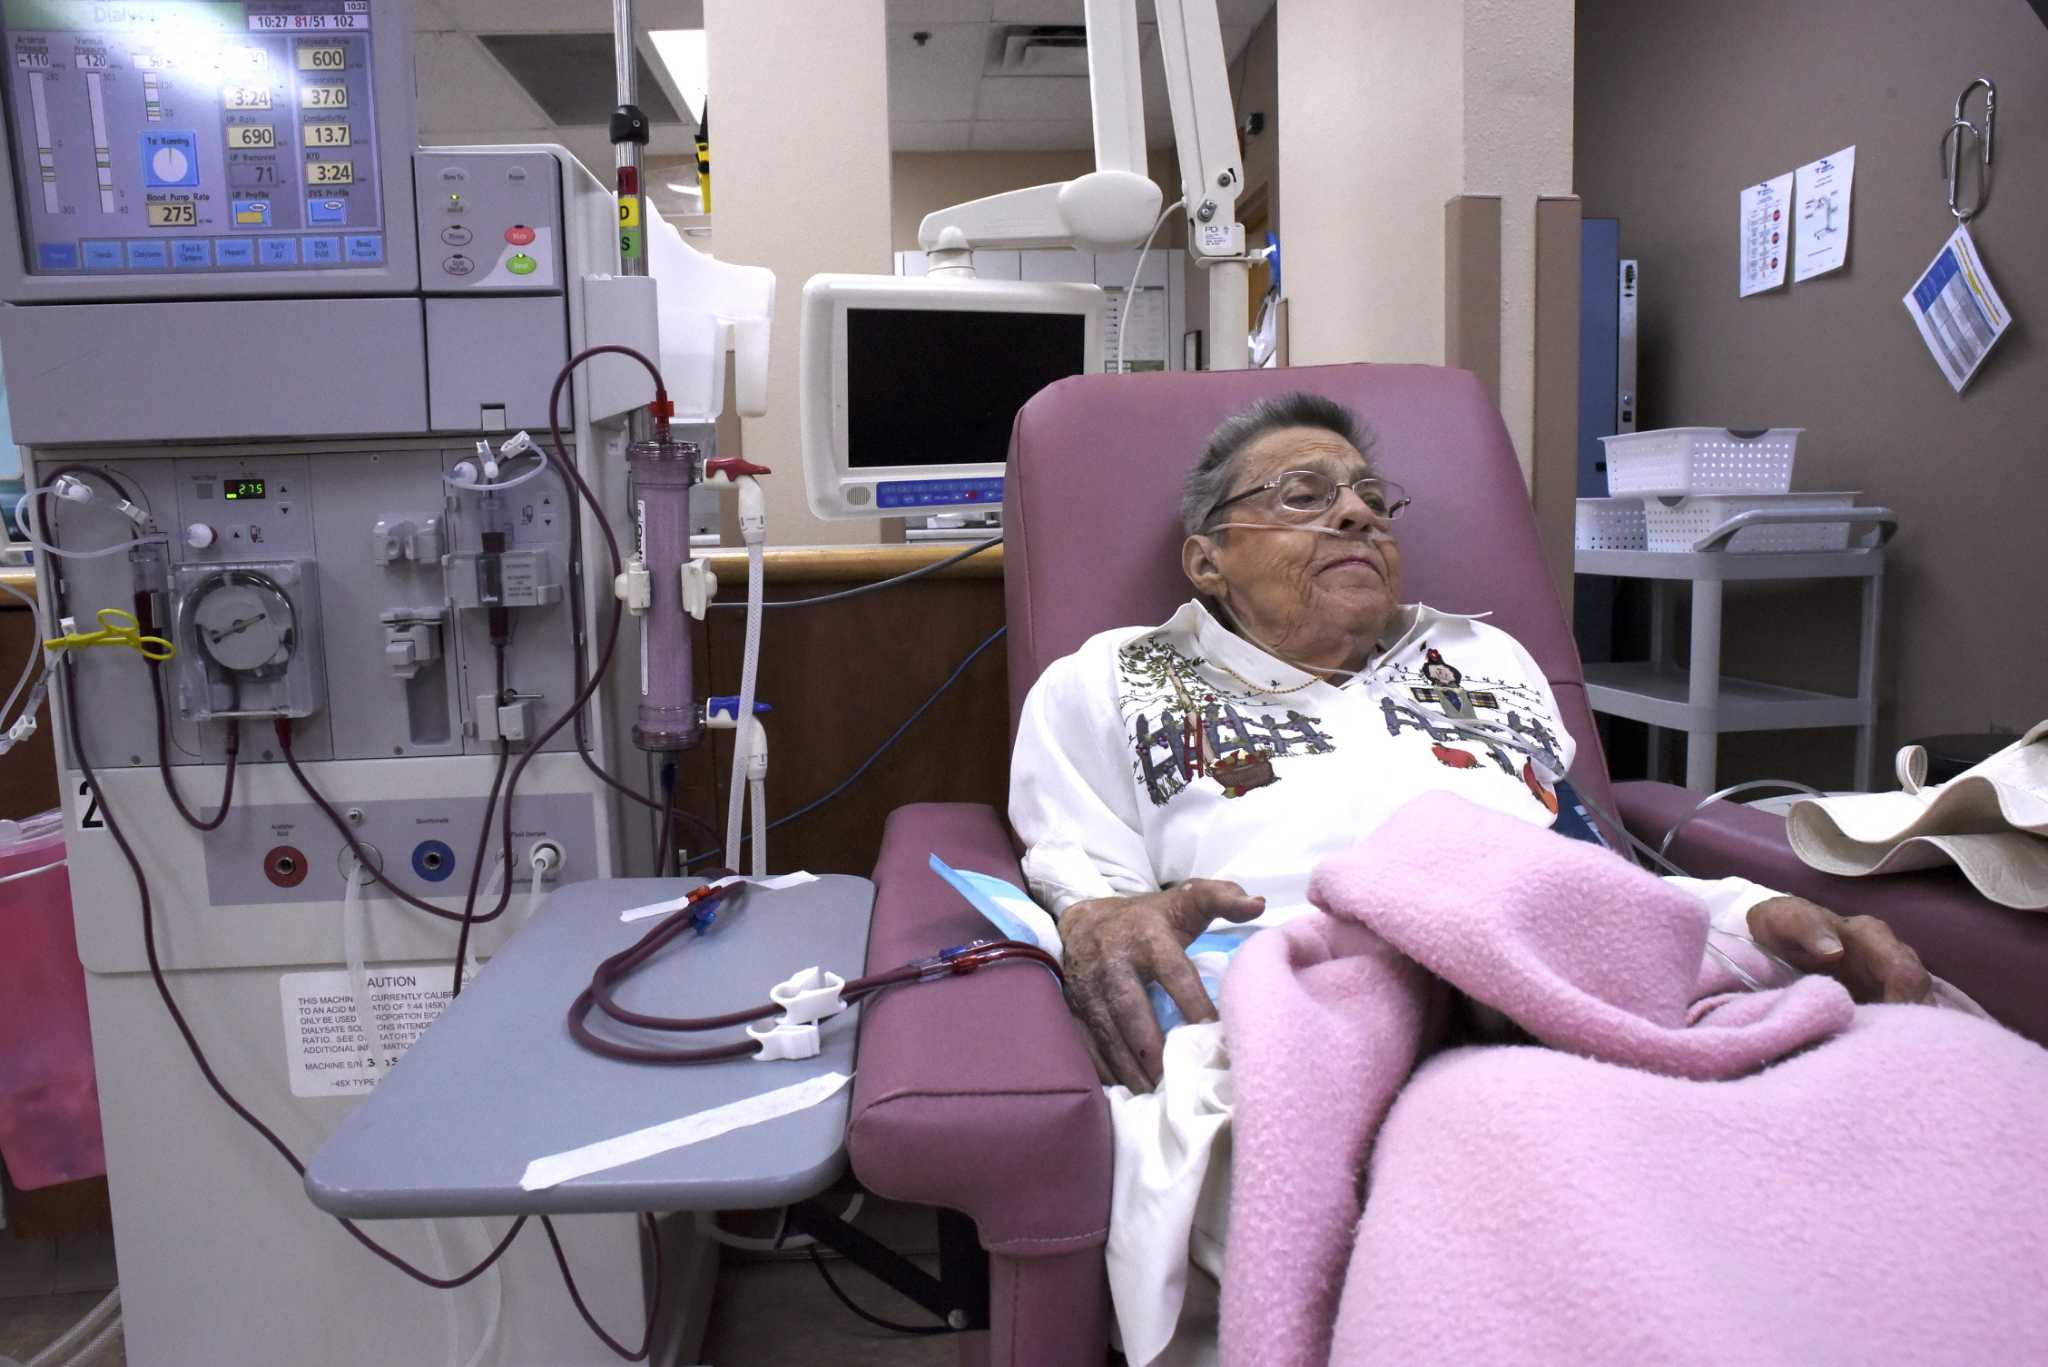 san-antonio-woman-set-to-be-longest-dialysis-patient-at-42-years-in